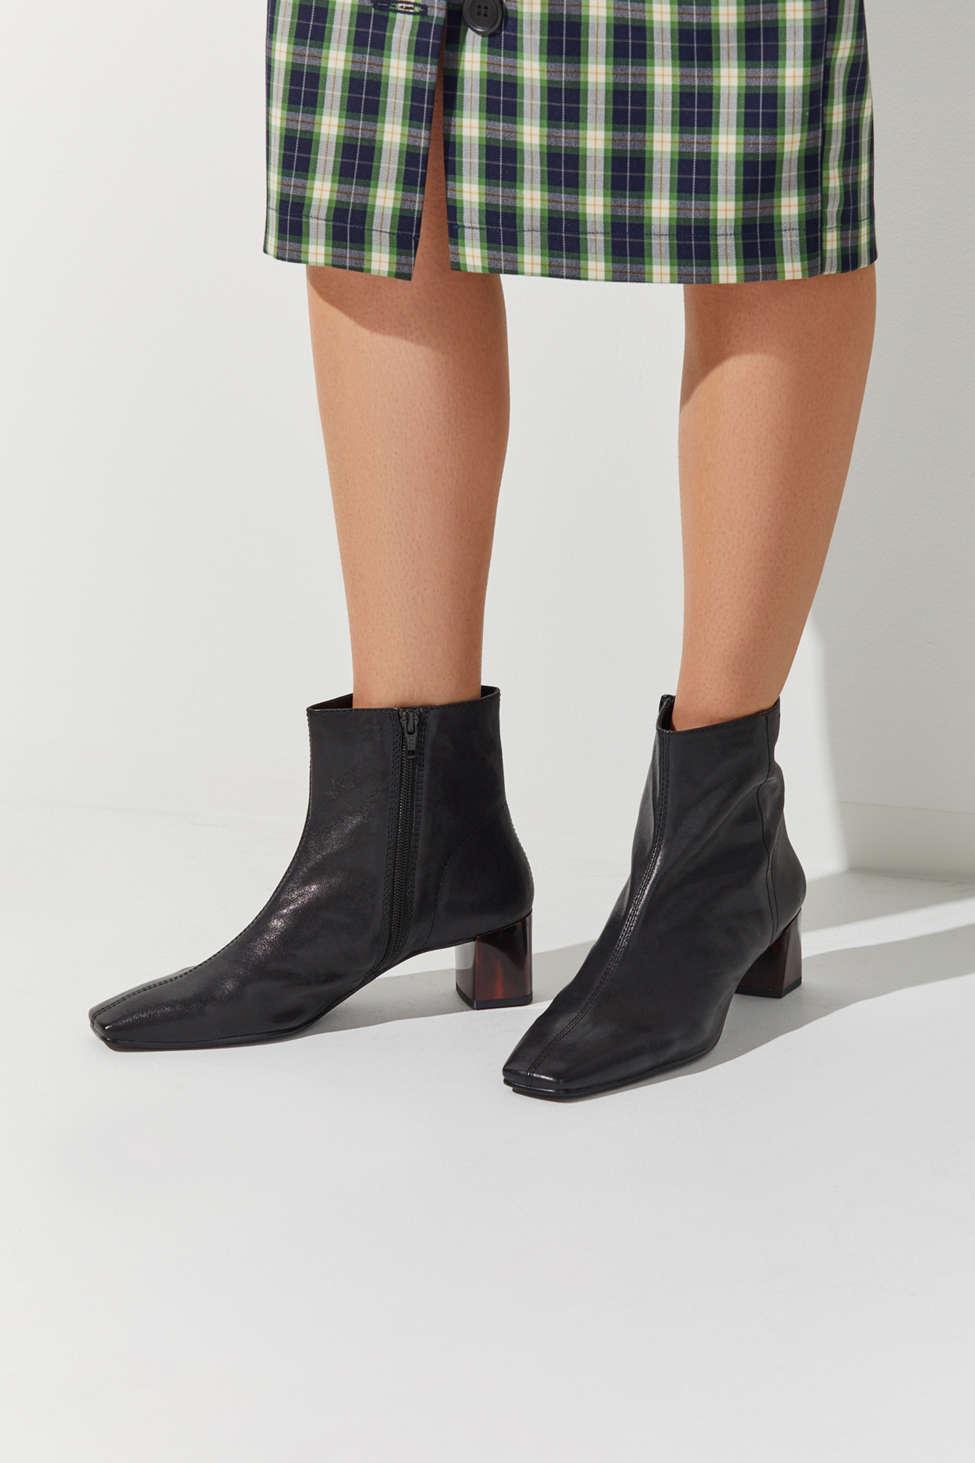 Vagabond Leather Leah Boot in Black - Lyst